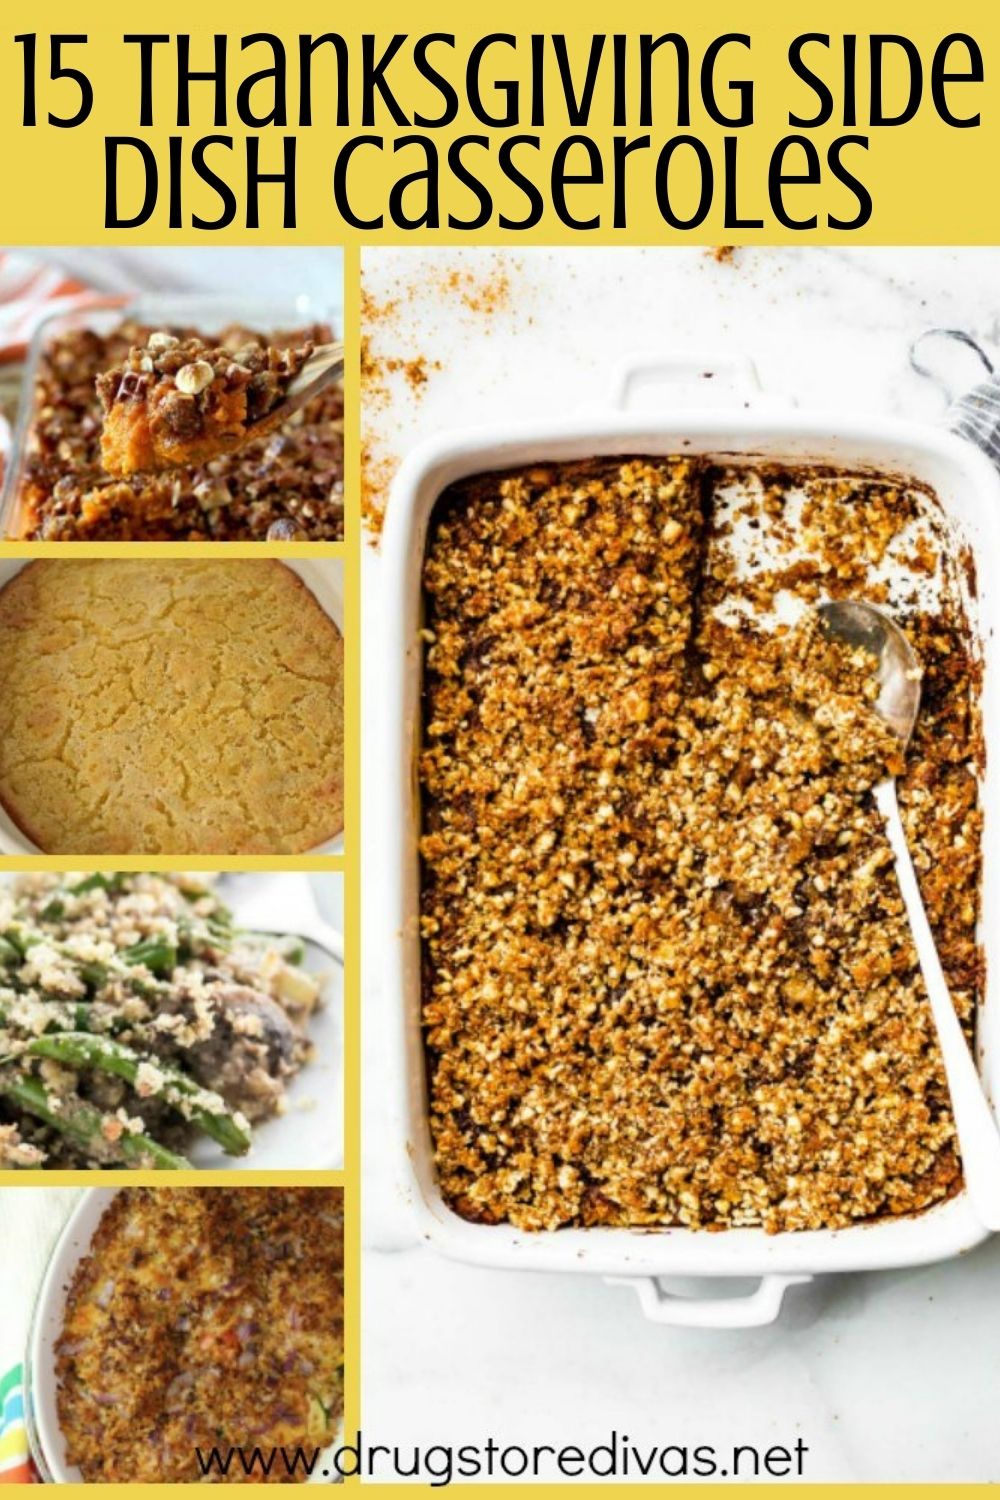 Get ready for your get togethers with this 15 Thanksgiving Side Dish Casseroles list from www.drugstoredivas.net. They work for every day too.